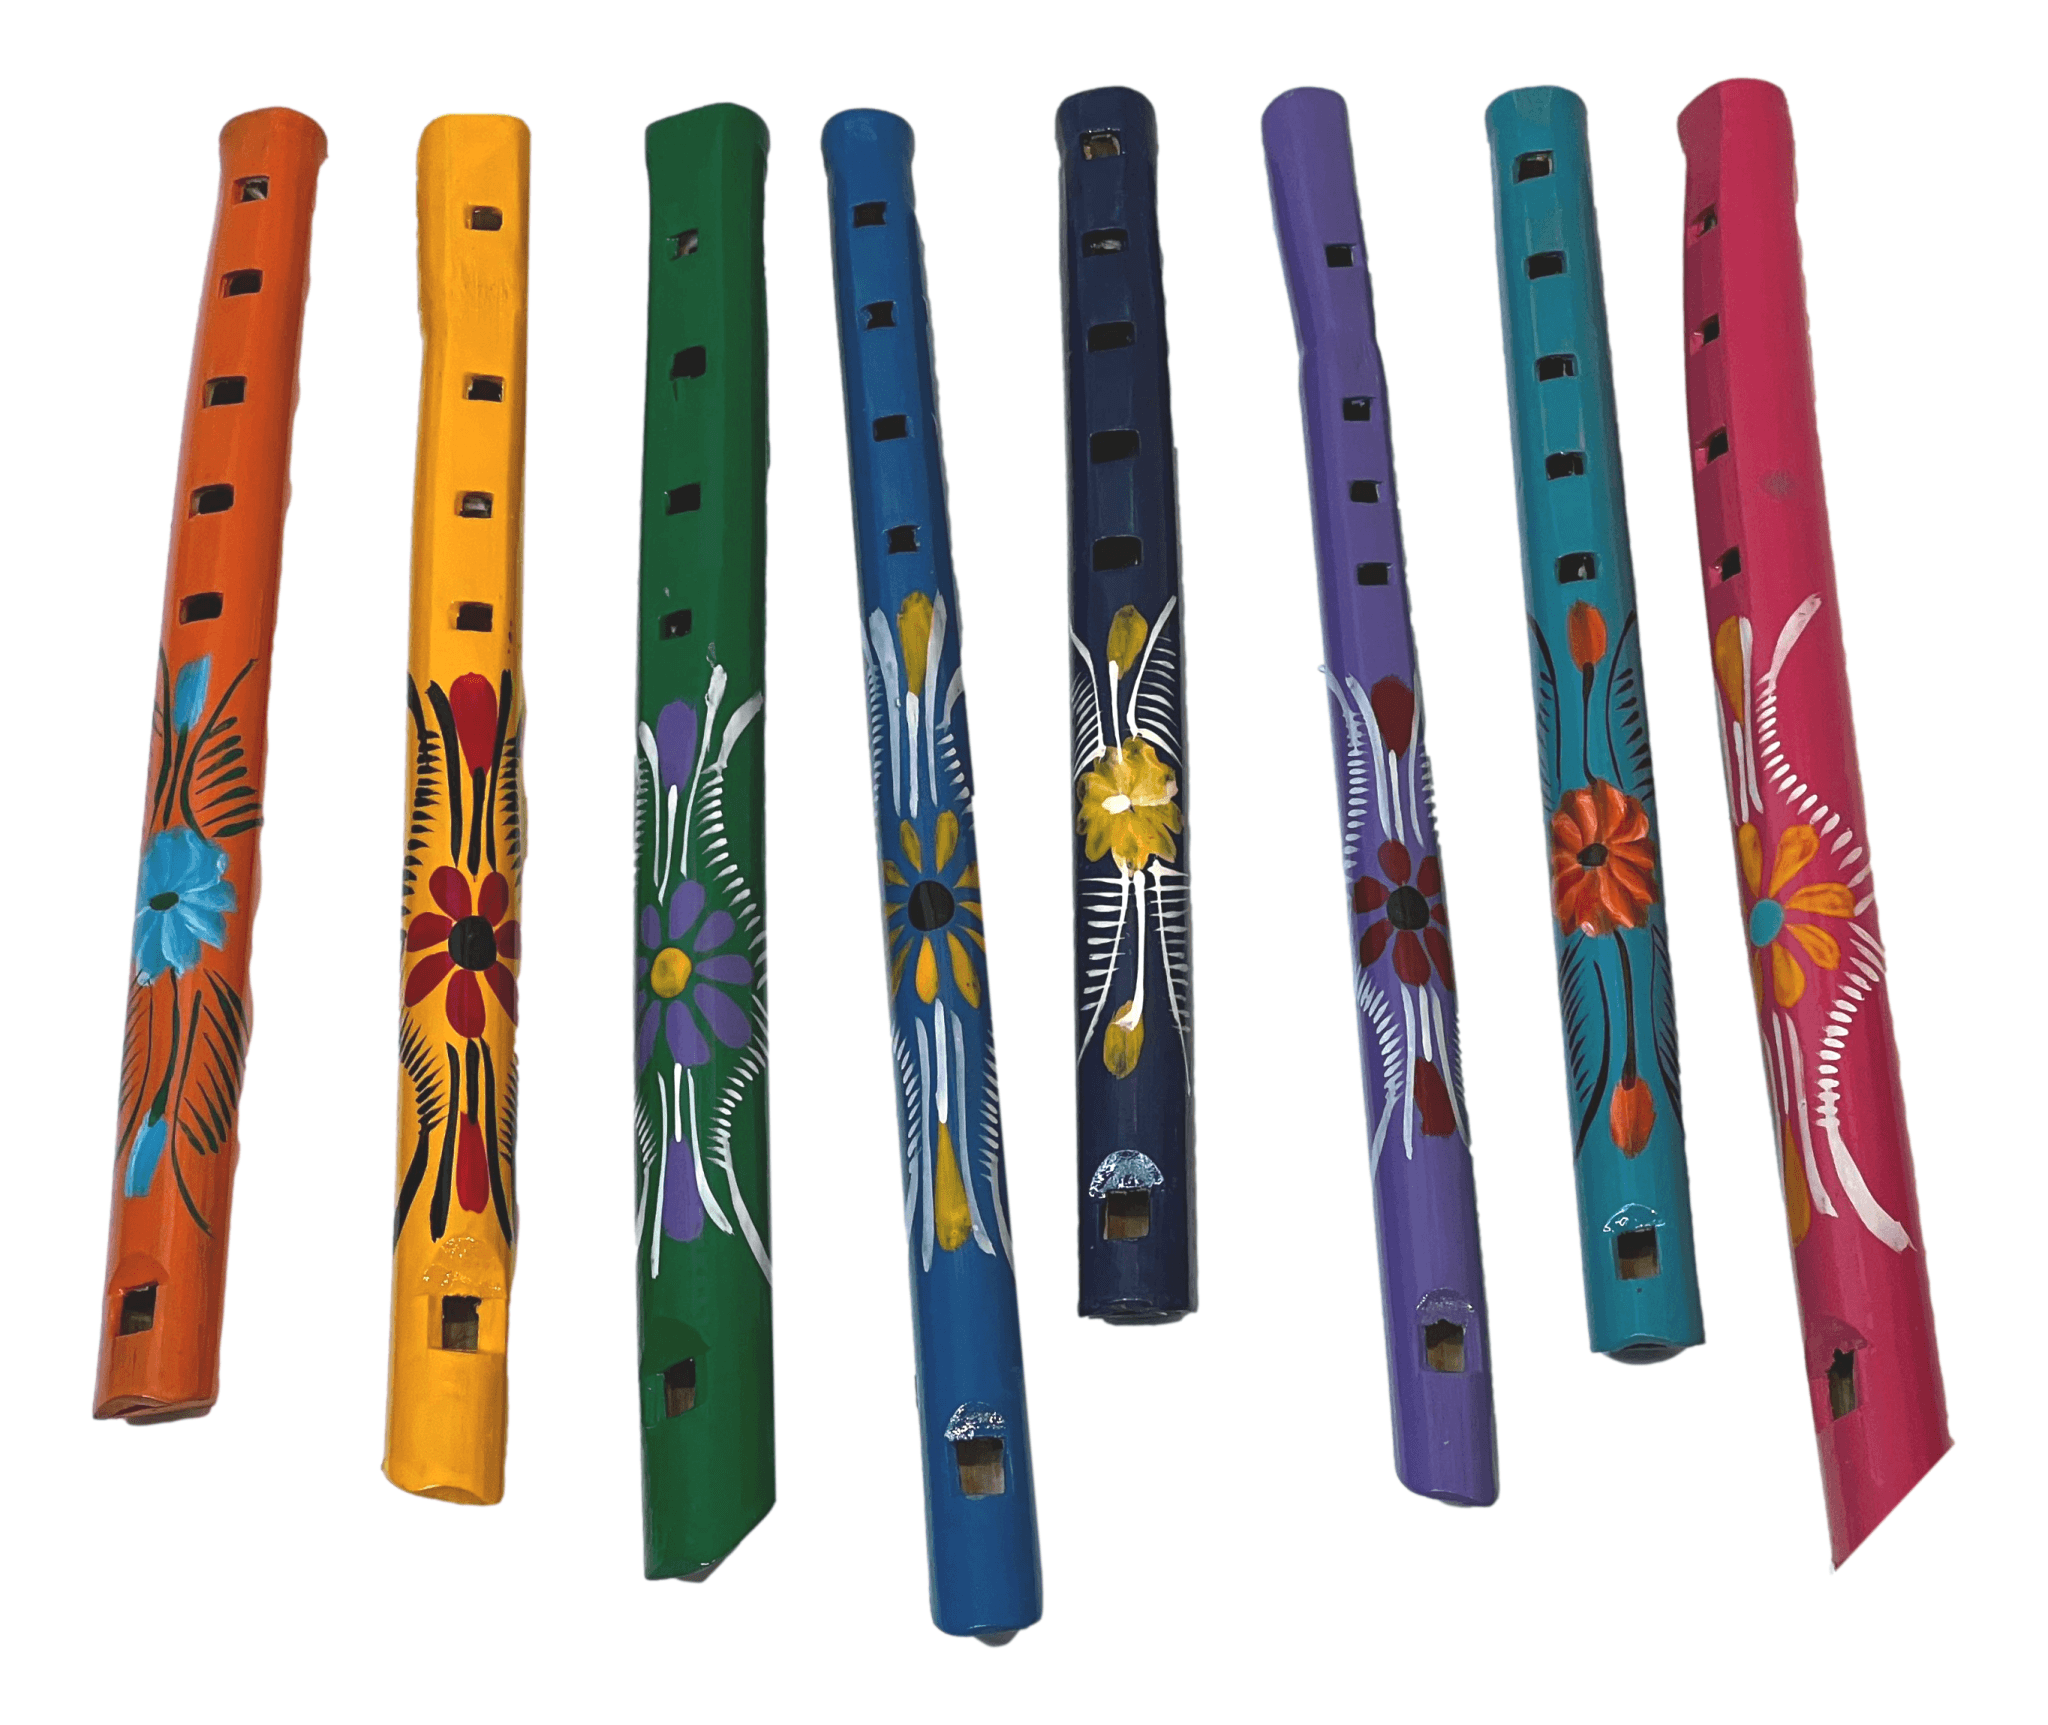 Flutes Wood Colorful Children Toy Painted Various Colors And Designs Handcrafted in Mexico L: 12 Inches   - Ysleta Mission Gift Shop- VOTED 2022 El Paso's Best Gift Shop